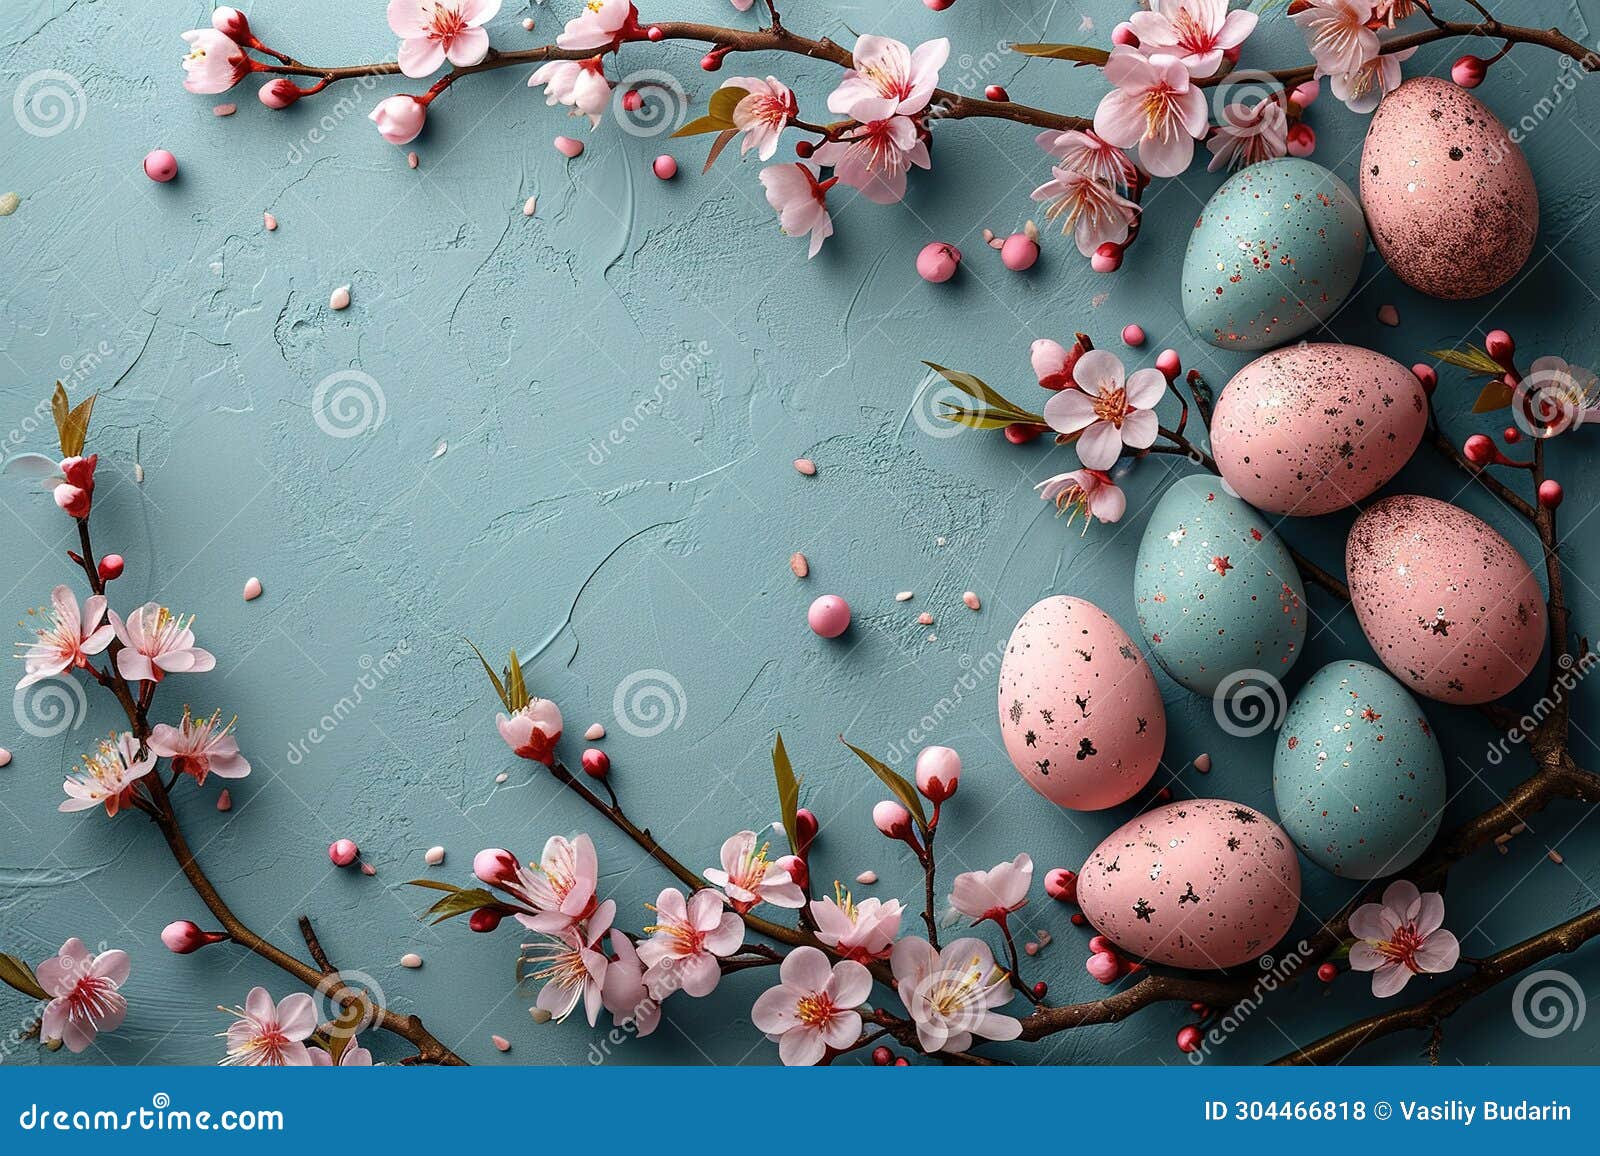 Happy Easter! Colorful Easter Chocolate Eggs with Cherry Blossoms Flat ...